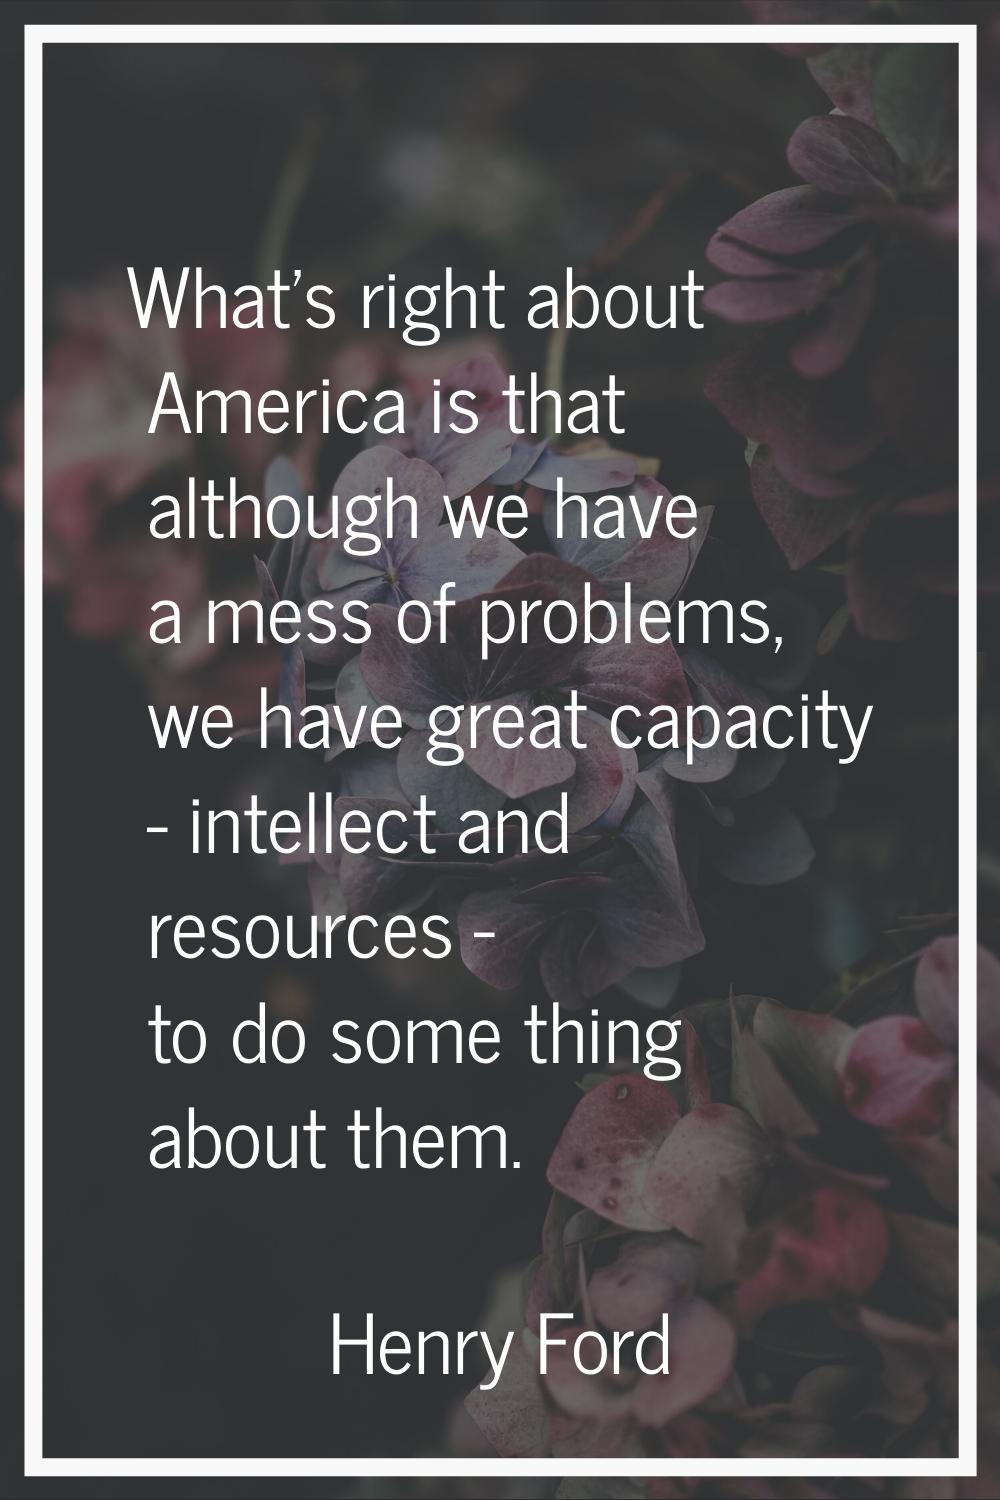 What's right about America is that although we have a mess of problems, we have great capacity - in